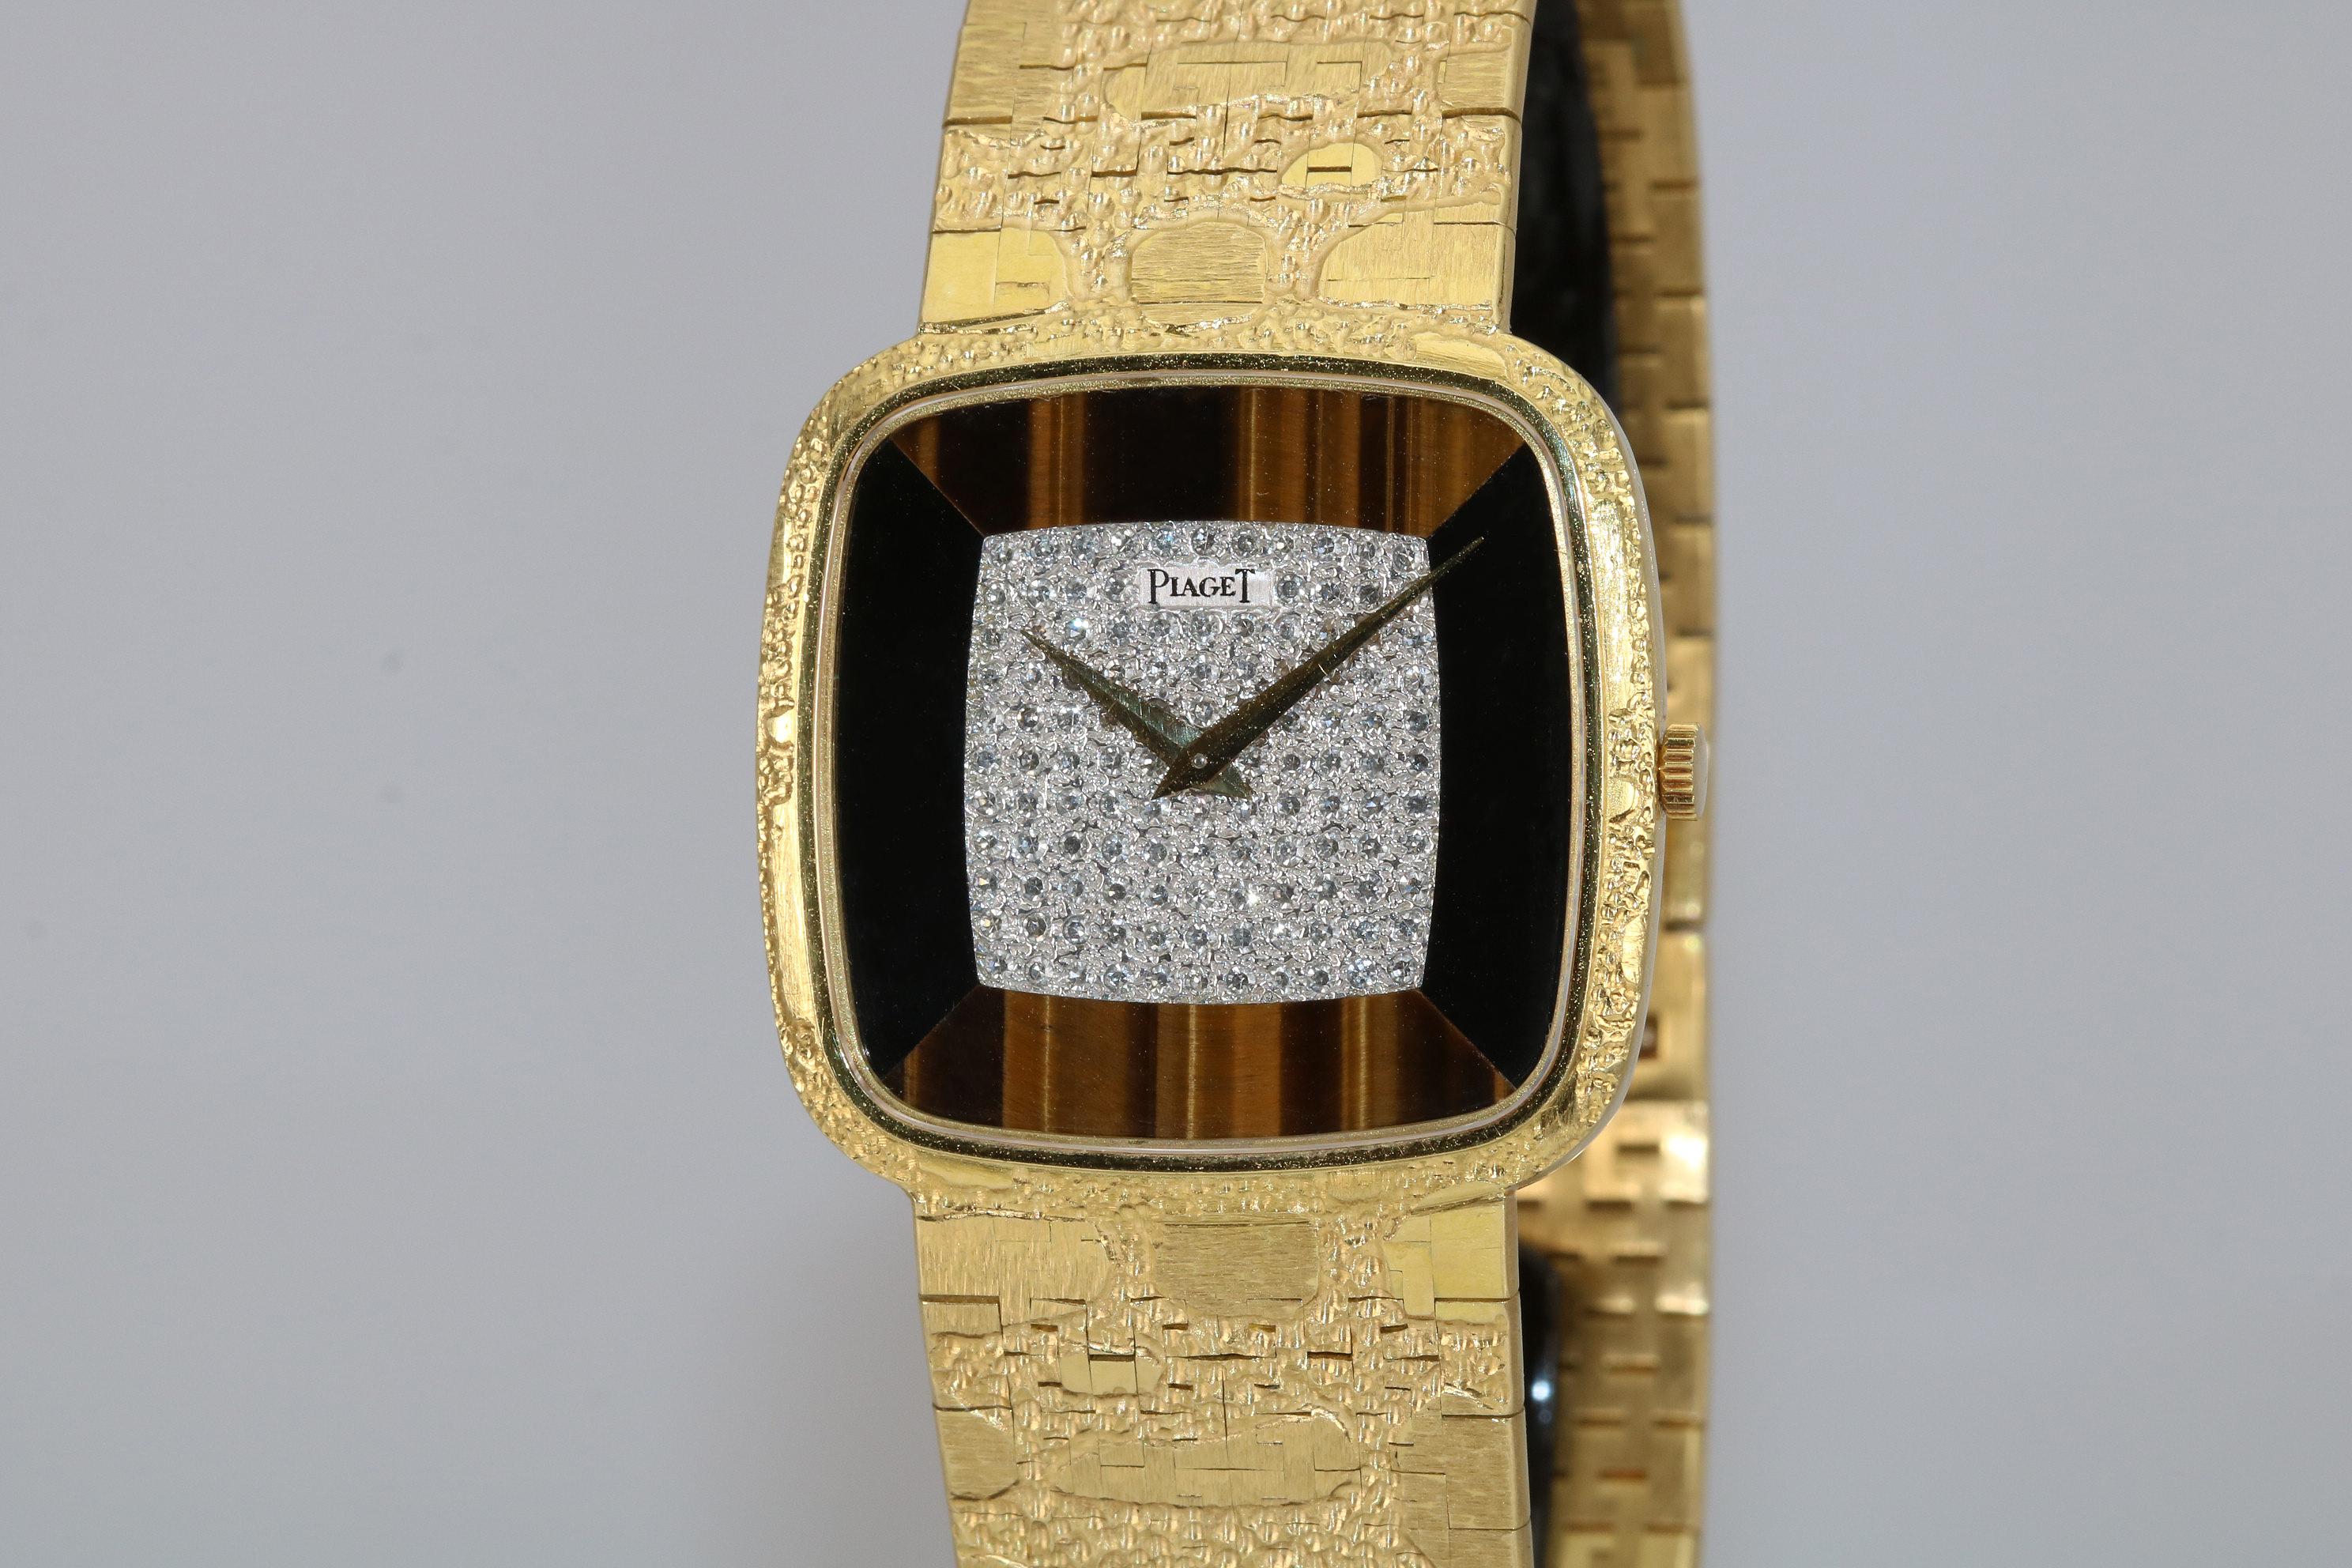 Piaget diamond, tiger's eye and onyx 18k yellow gold wristwatch with an 18k yellow gold integrated textured Piaget bracelet and folding clasp.